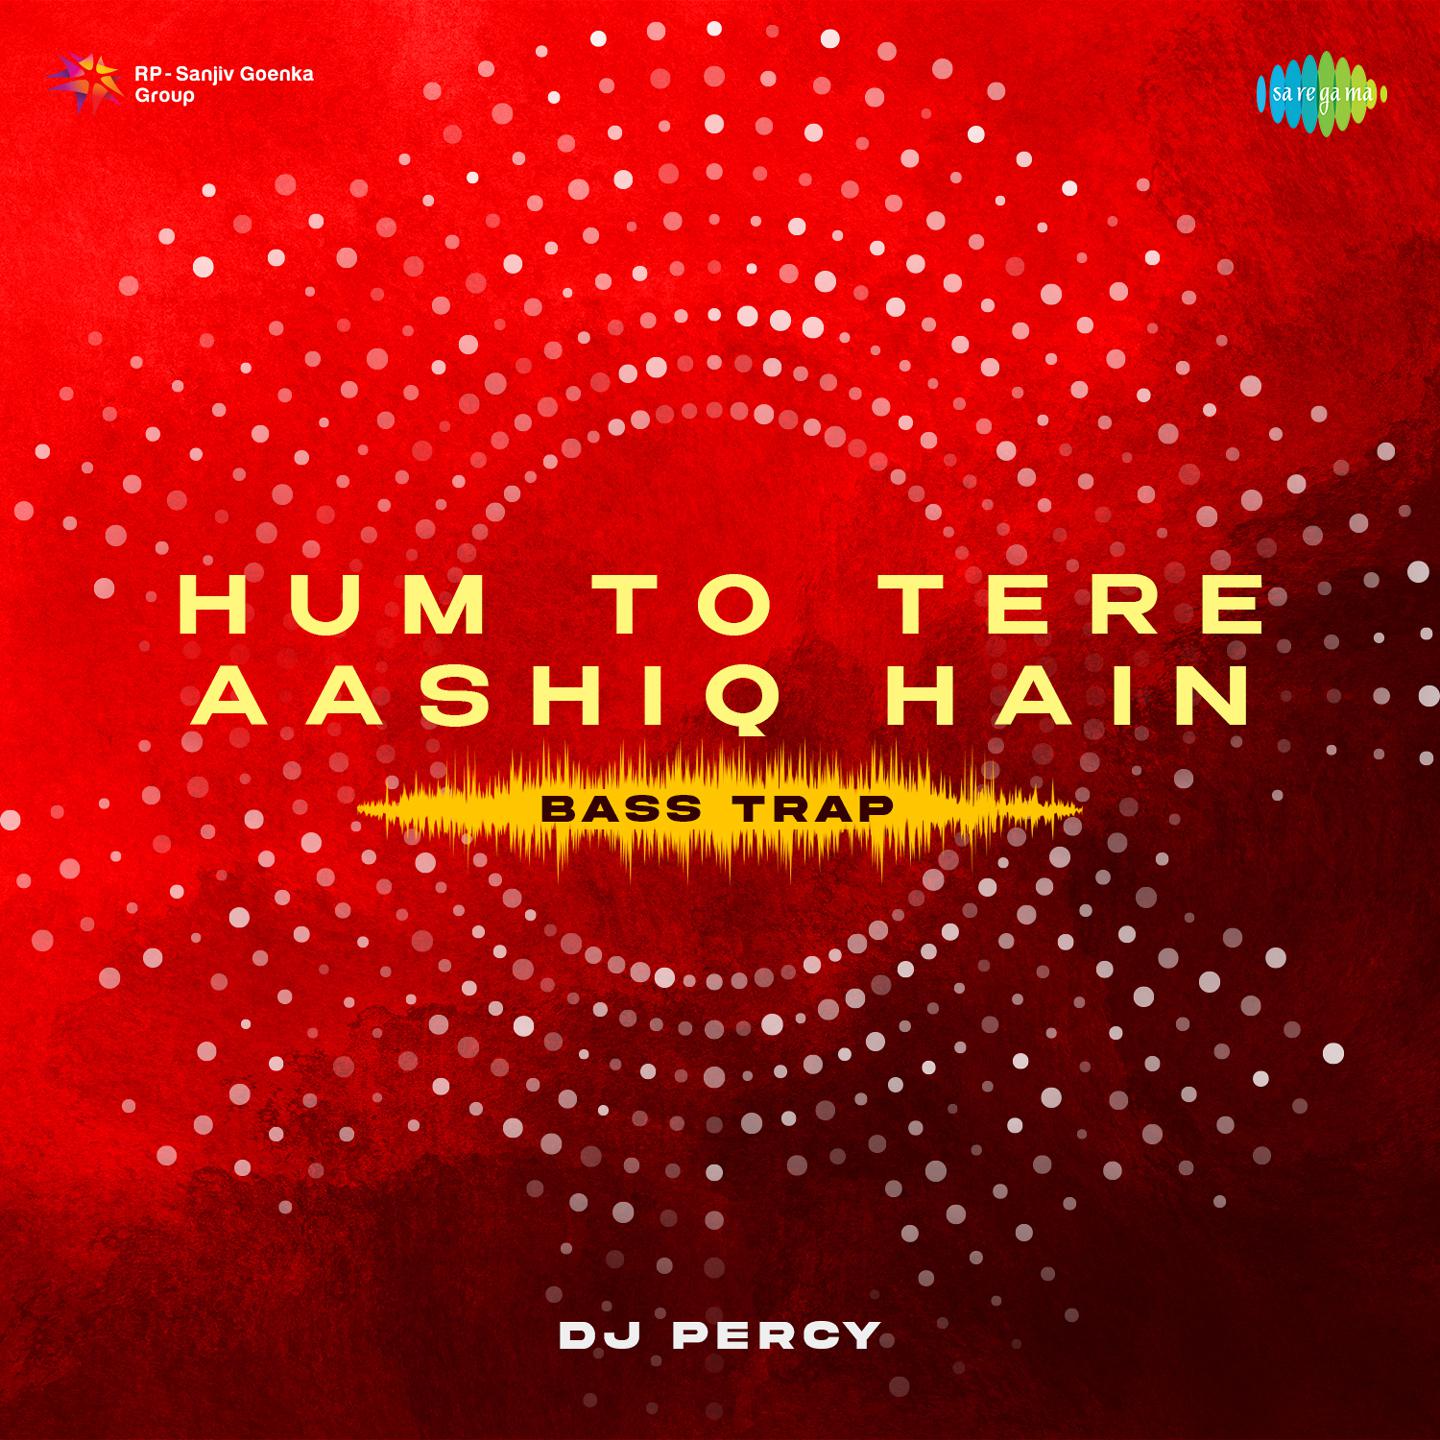 DJ Percy - Hum To Tere Aashiq Hain Bass Trap